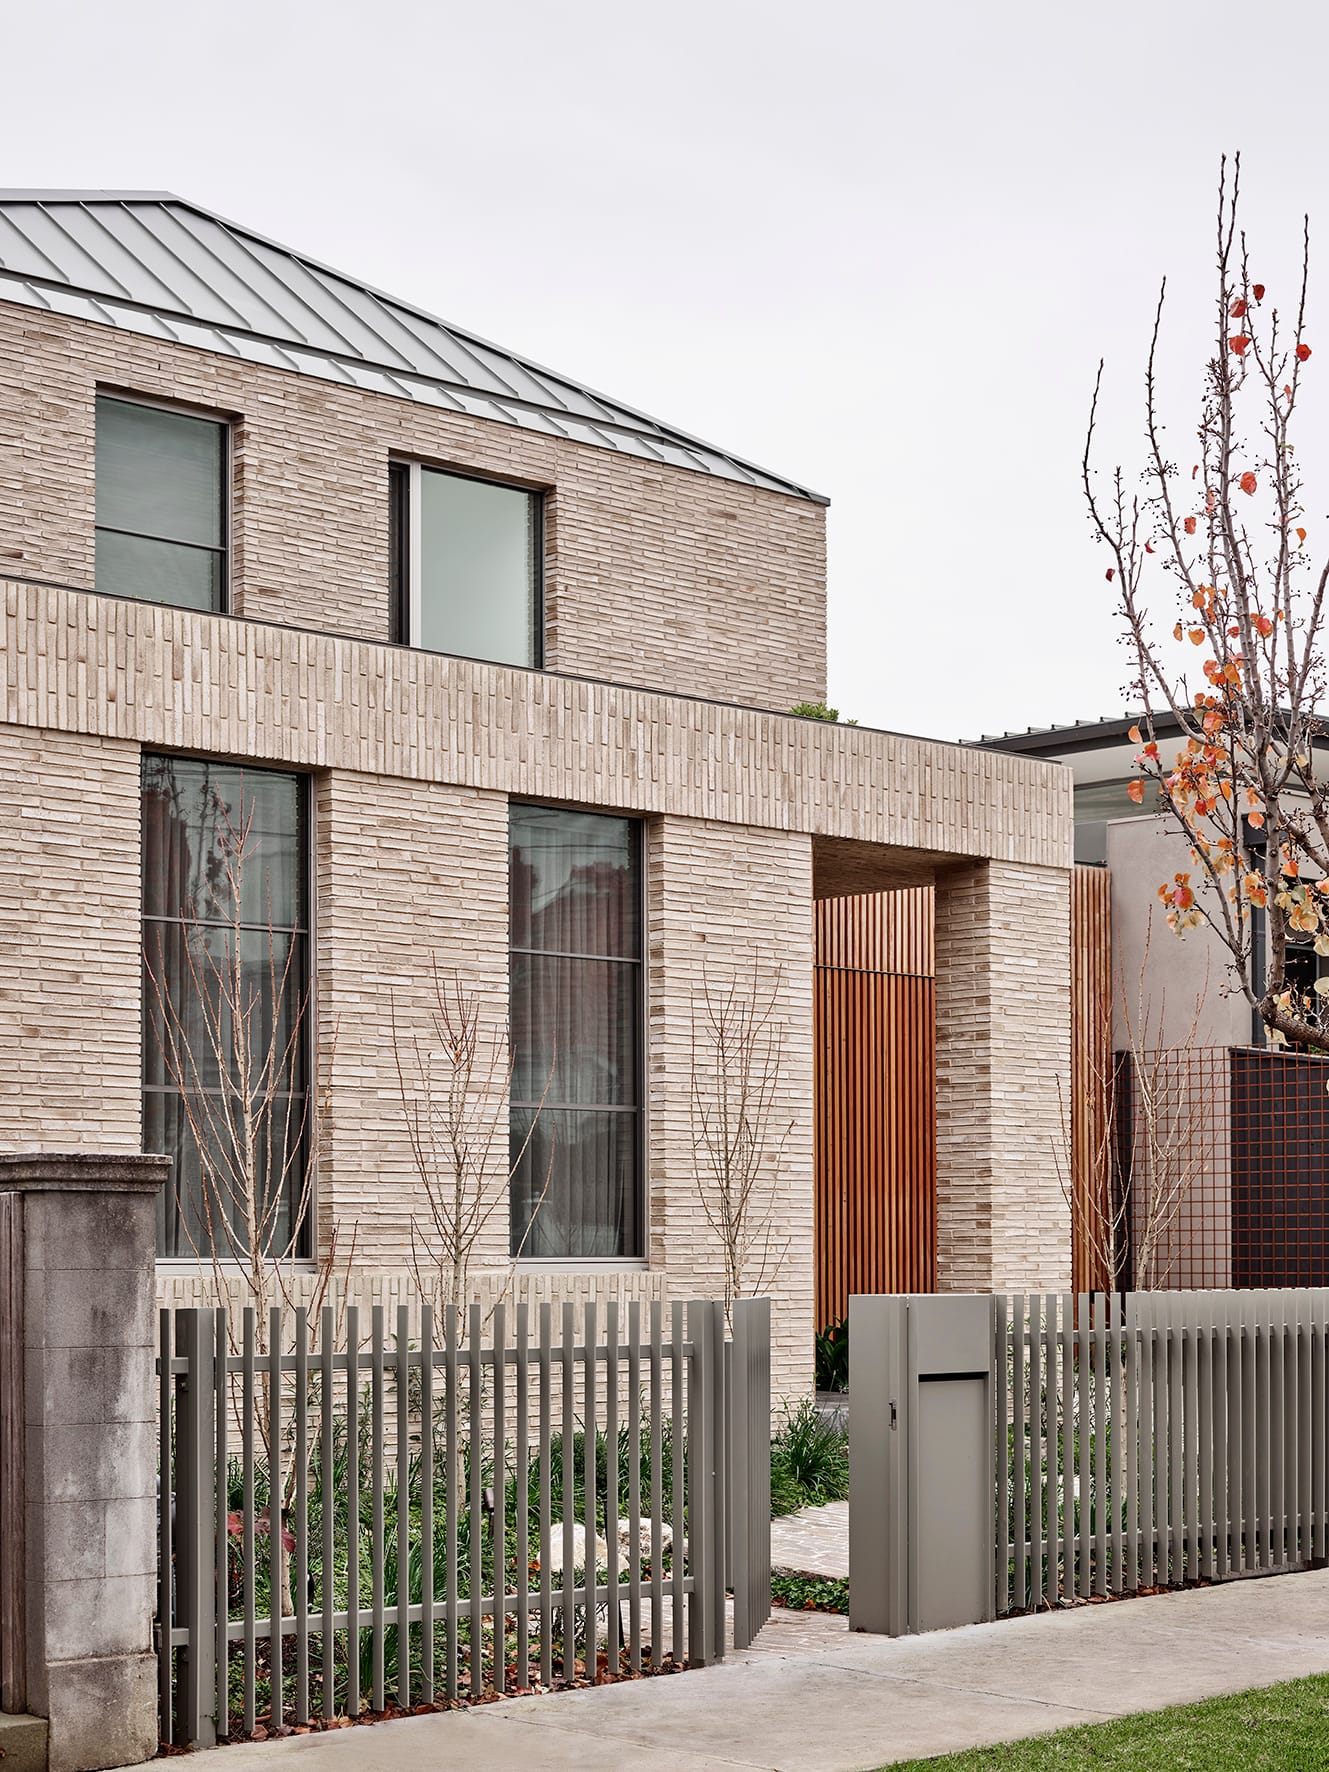 Terra Firma by RobsonRak showing the street facade of this new house showing the thin brickwork